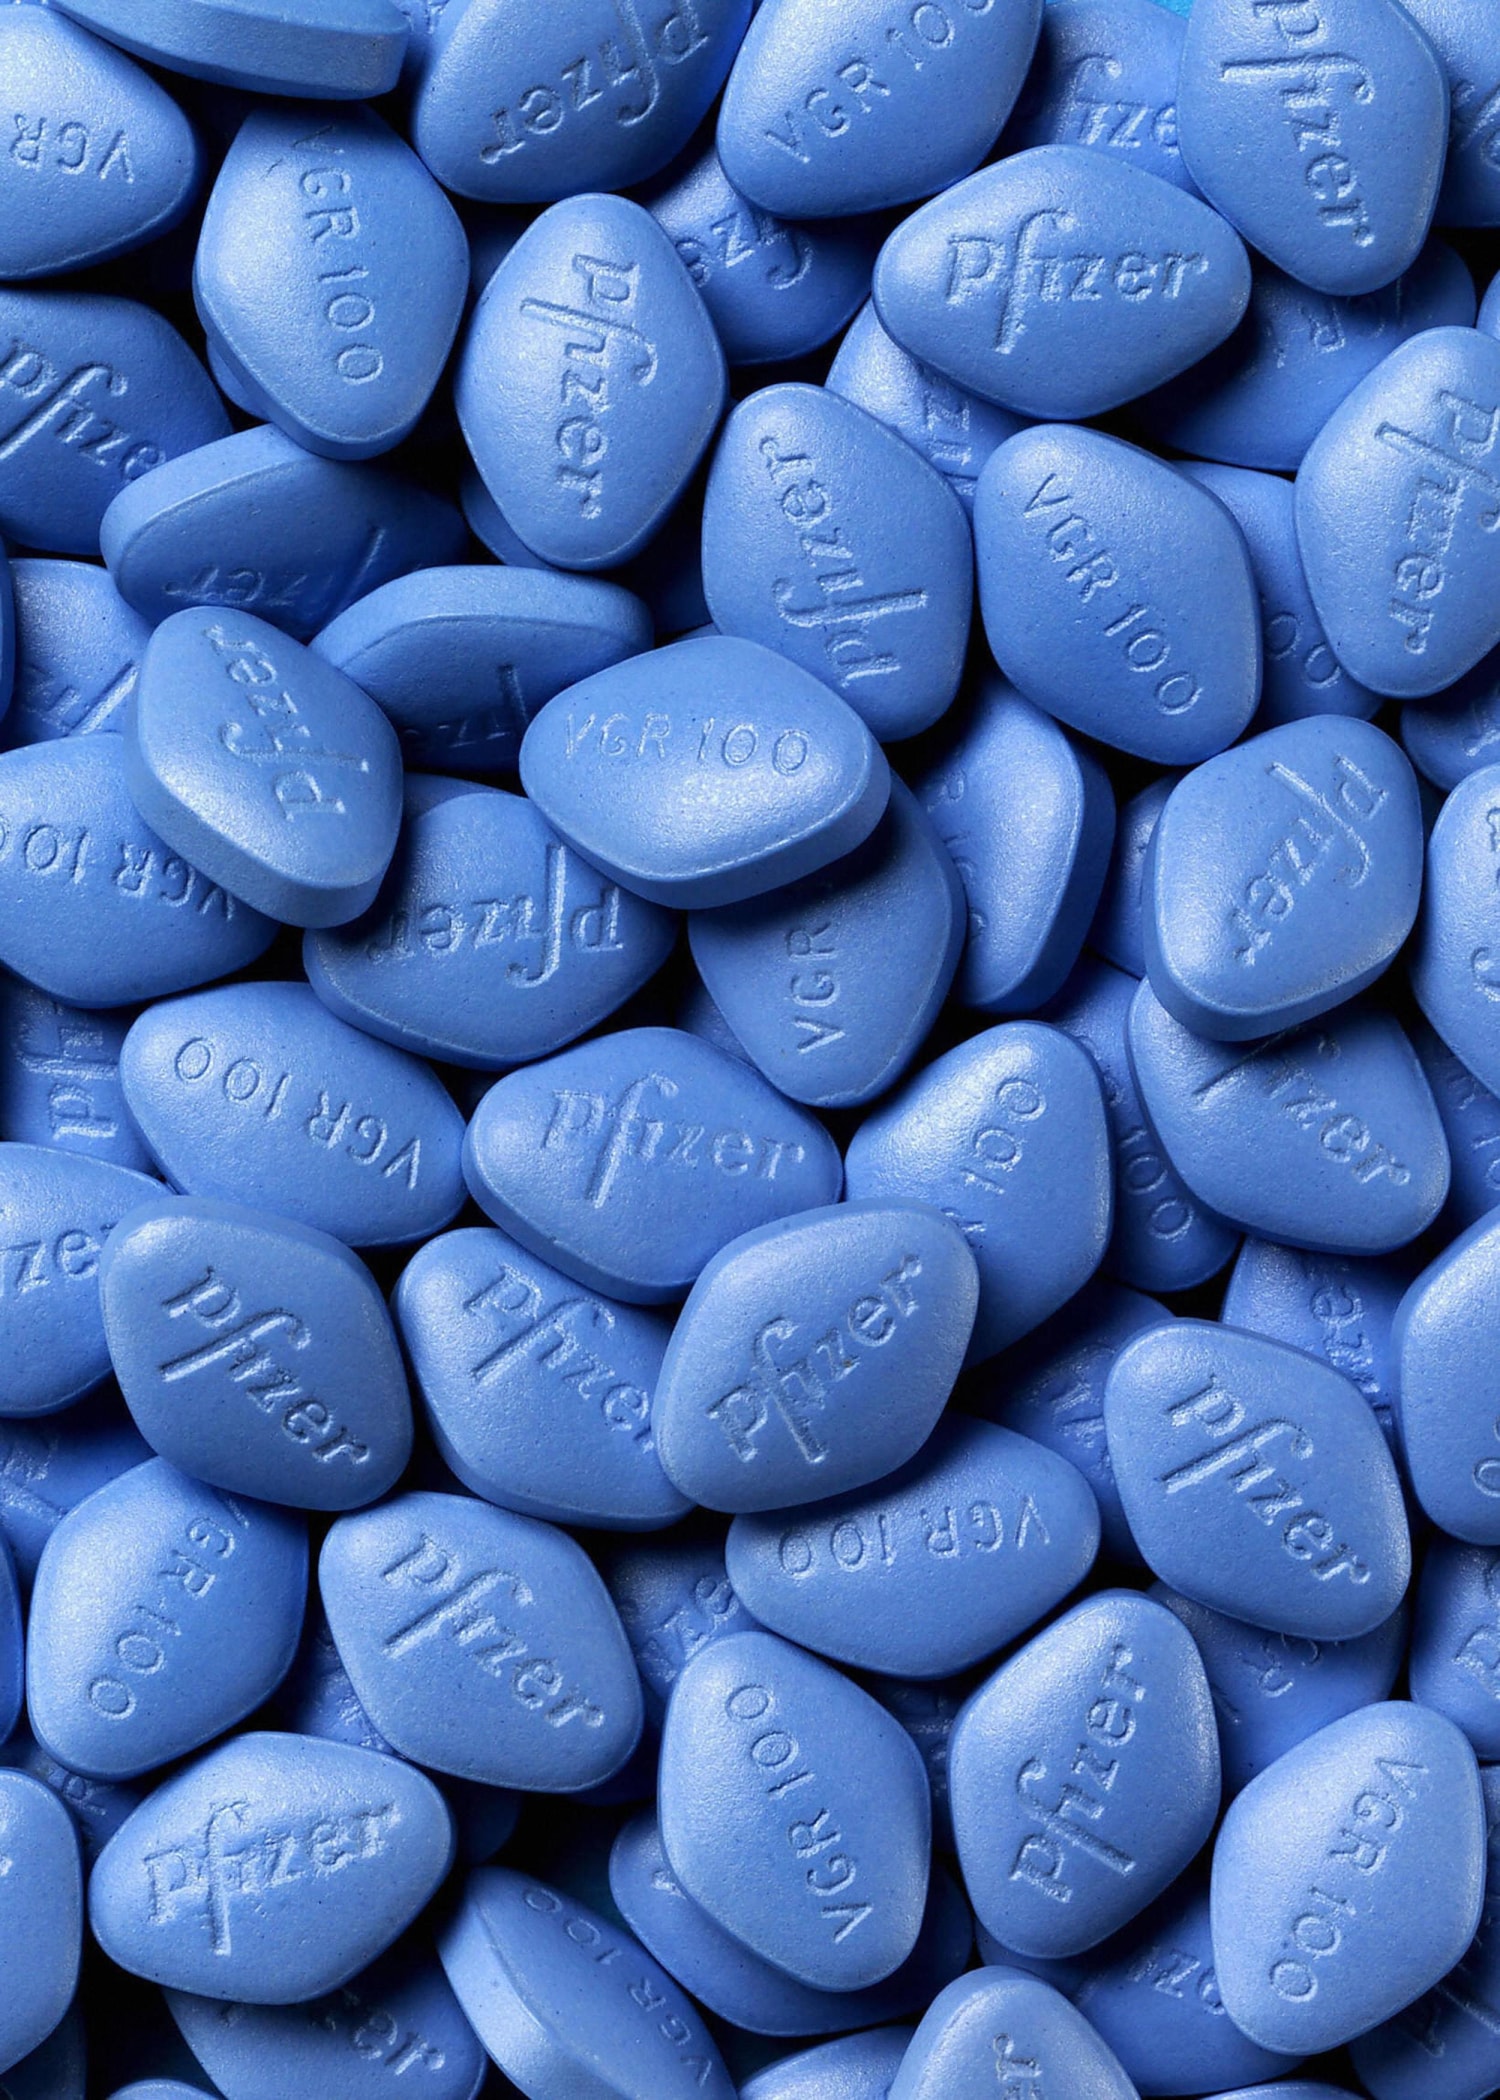 Viagra May Boost Risk of Deadly Skin Cancer, Study Finds